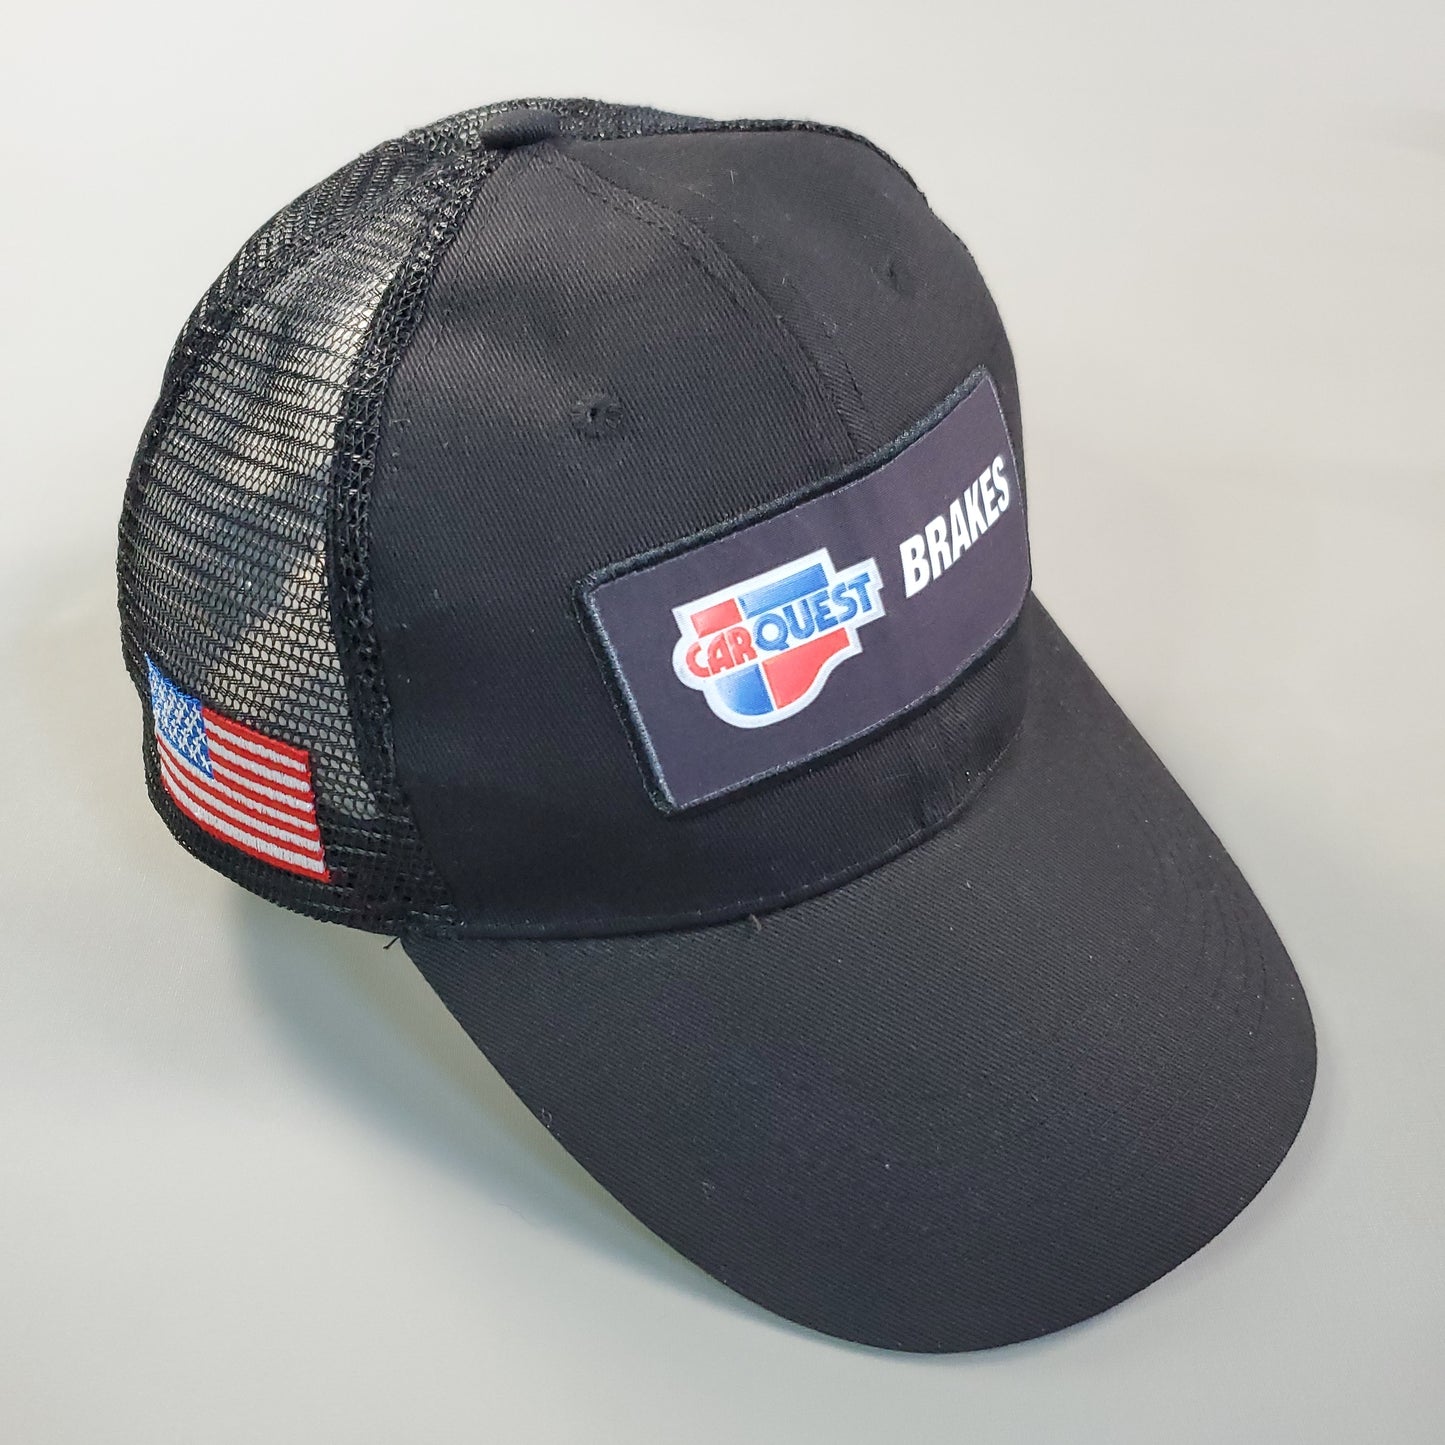 CARQUEST Brakes Hat With American Flag Patch Snapback Baseball Cap Black (New)